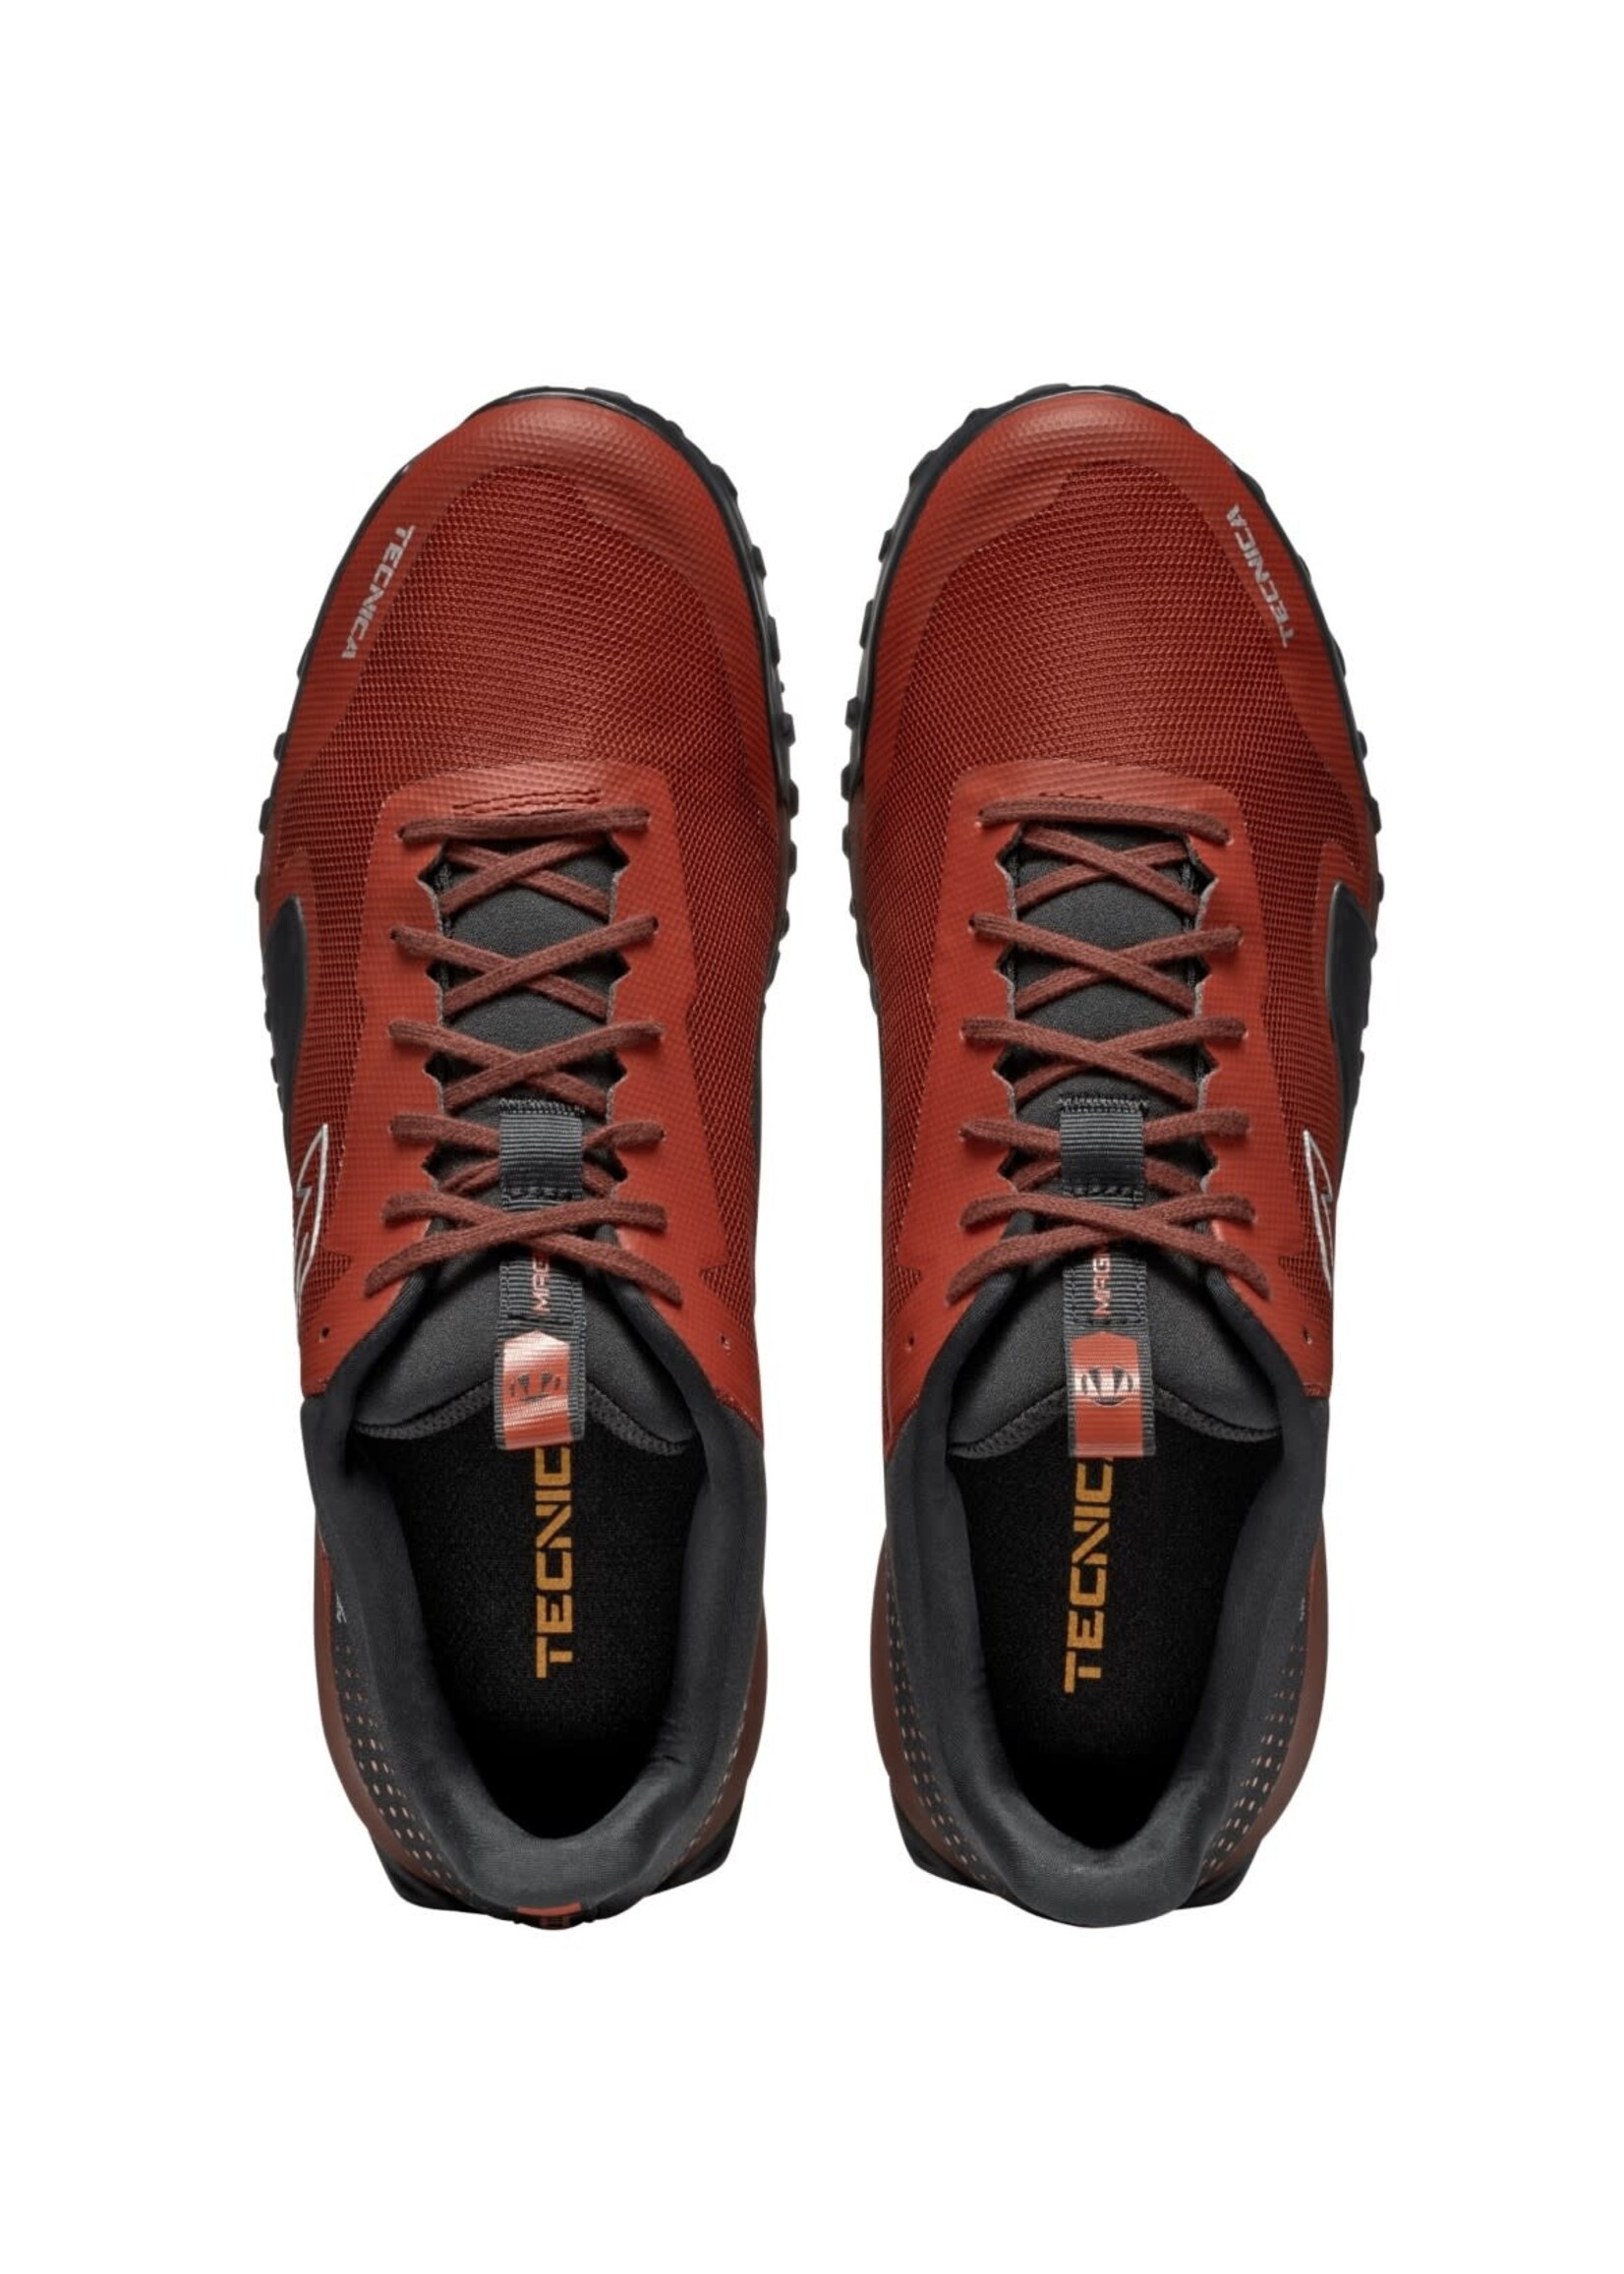 Tecnica Chaussure Tecnica Magma 2.0 S GTX - Homme